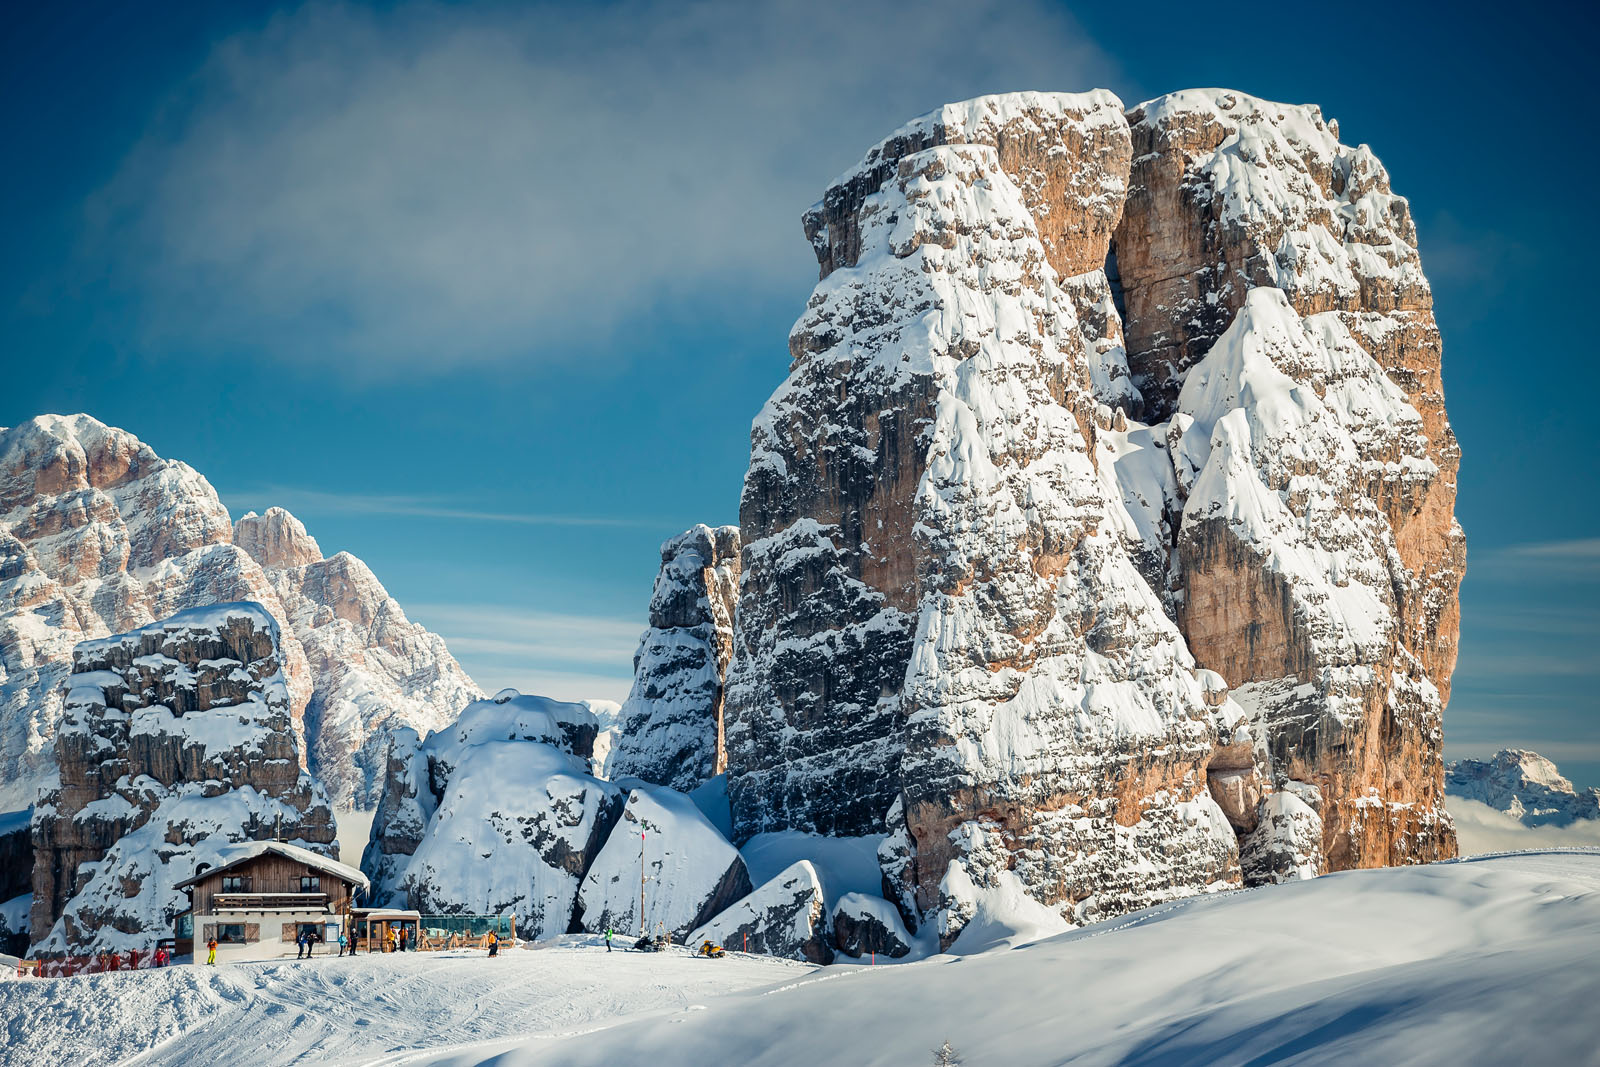 The famous 5 Torri in Cortina. Photo: www.bandion.it- Cortina Marketing. Cortina D’Ampezzo is gearing up for a great winter season and the 2021 Ski World Championships.